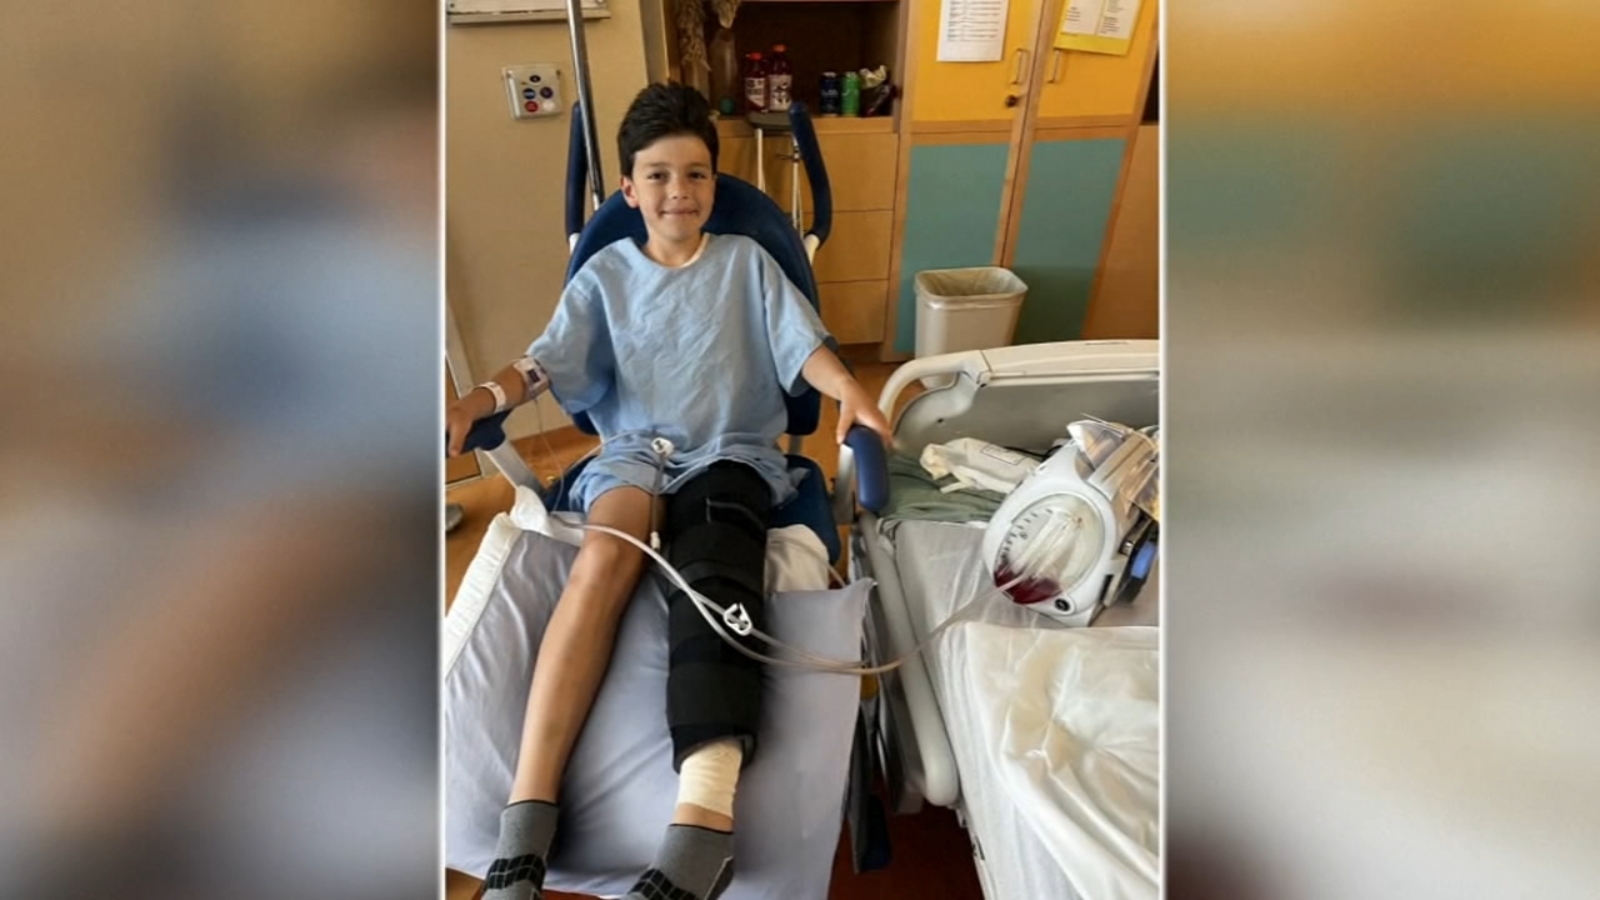 Cancun, Mexico shark attack: 10-year-old boy speaks out after being severely bitten on spring break